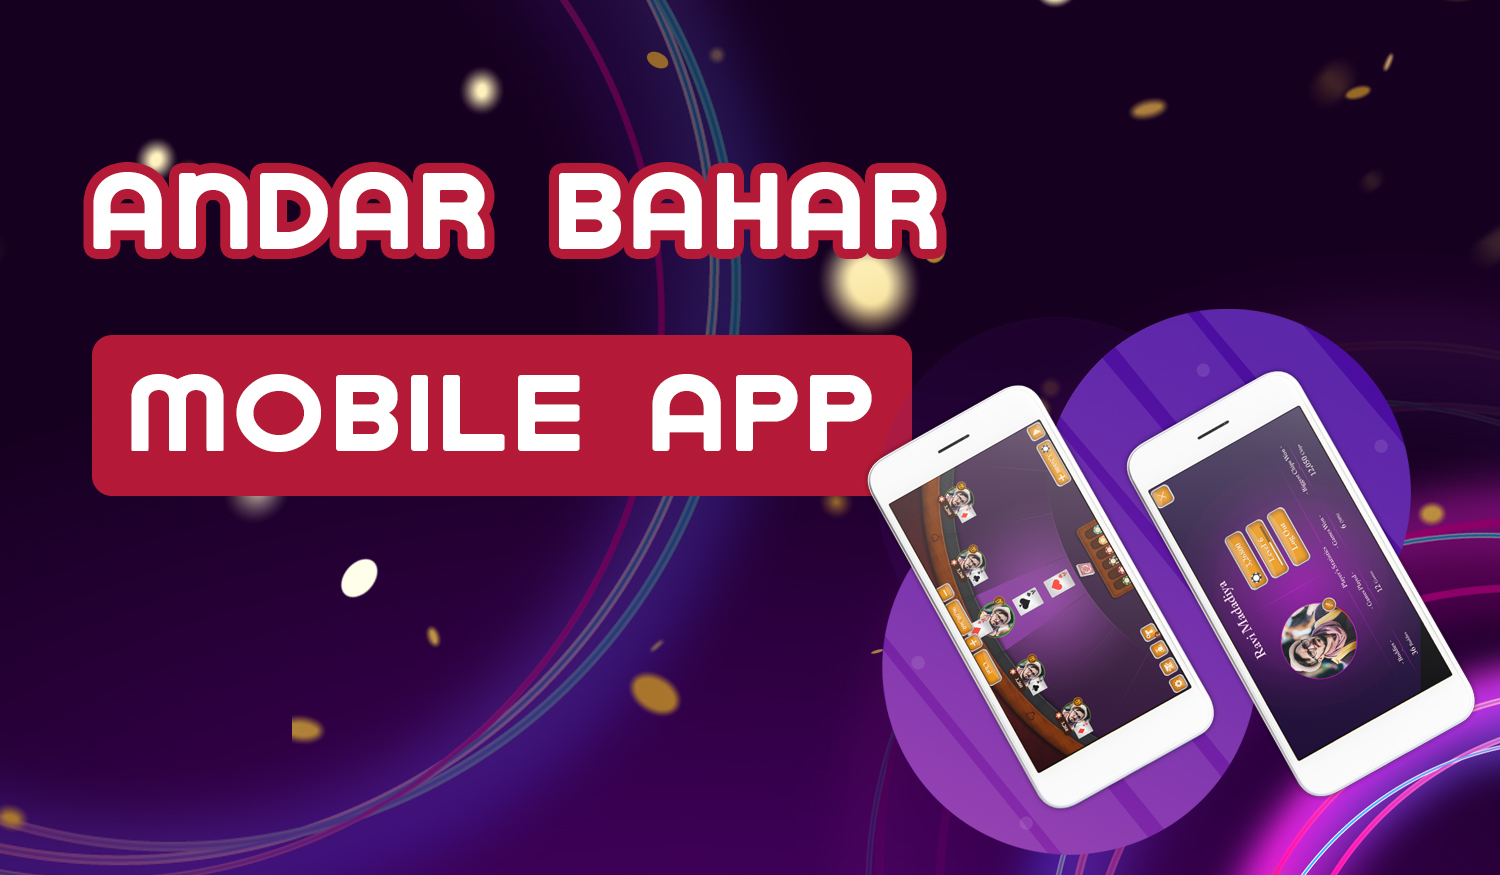 Features of the game in Andar Bahar with mobile app